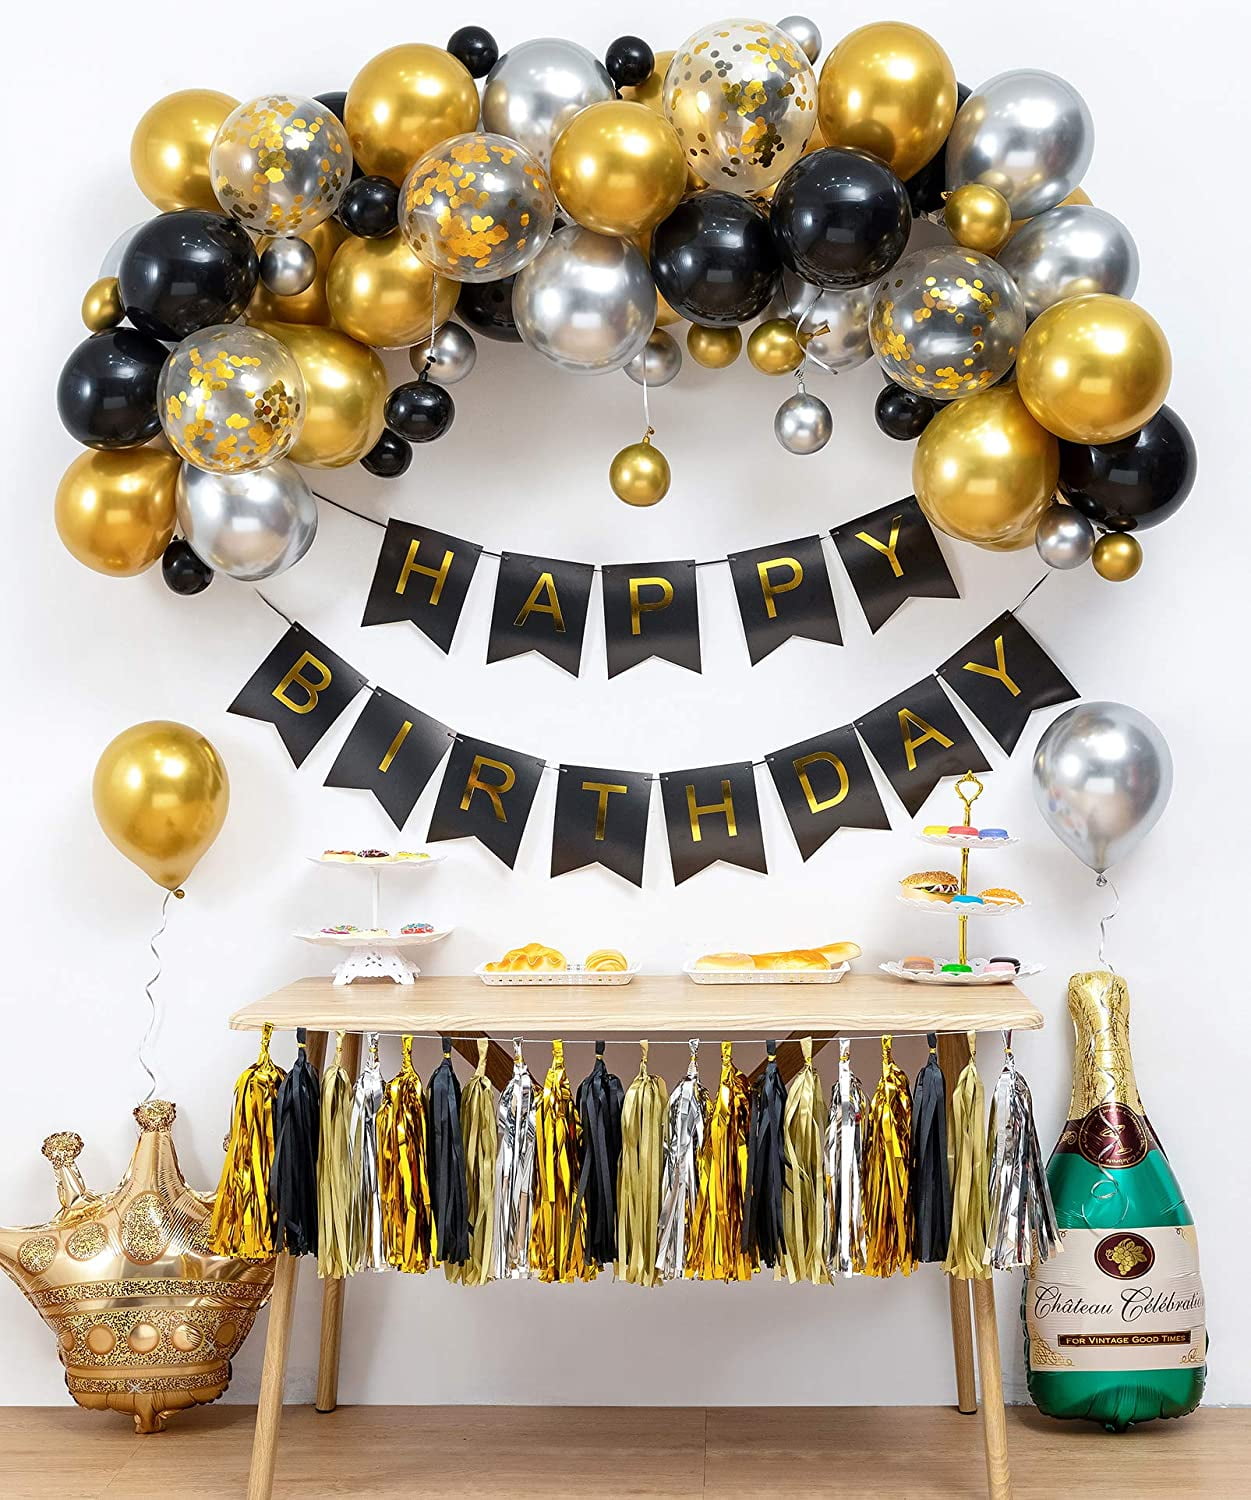 Golden - Personalized Happy Birthday Balloon with Tassel